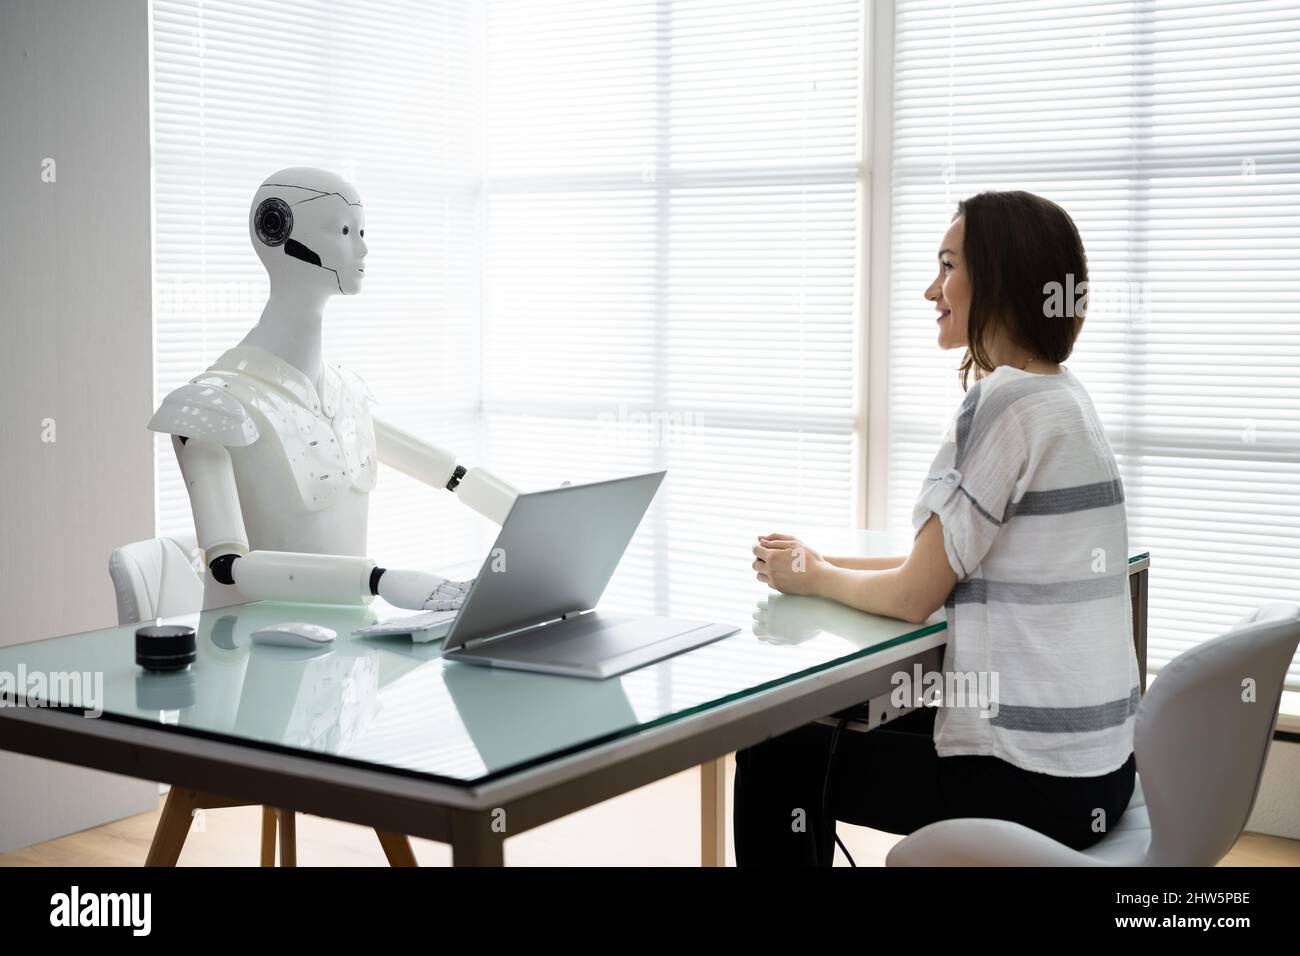 Female Patient Treatment By Robot Doctor In Hospital Stock Photo